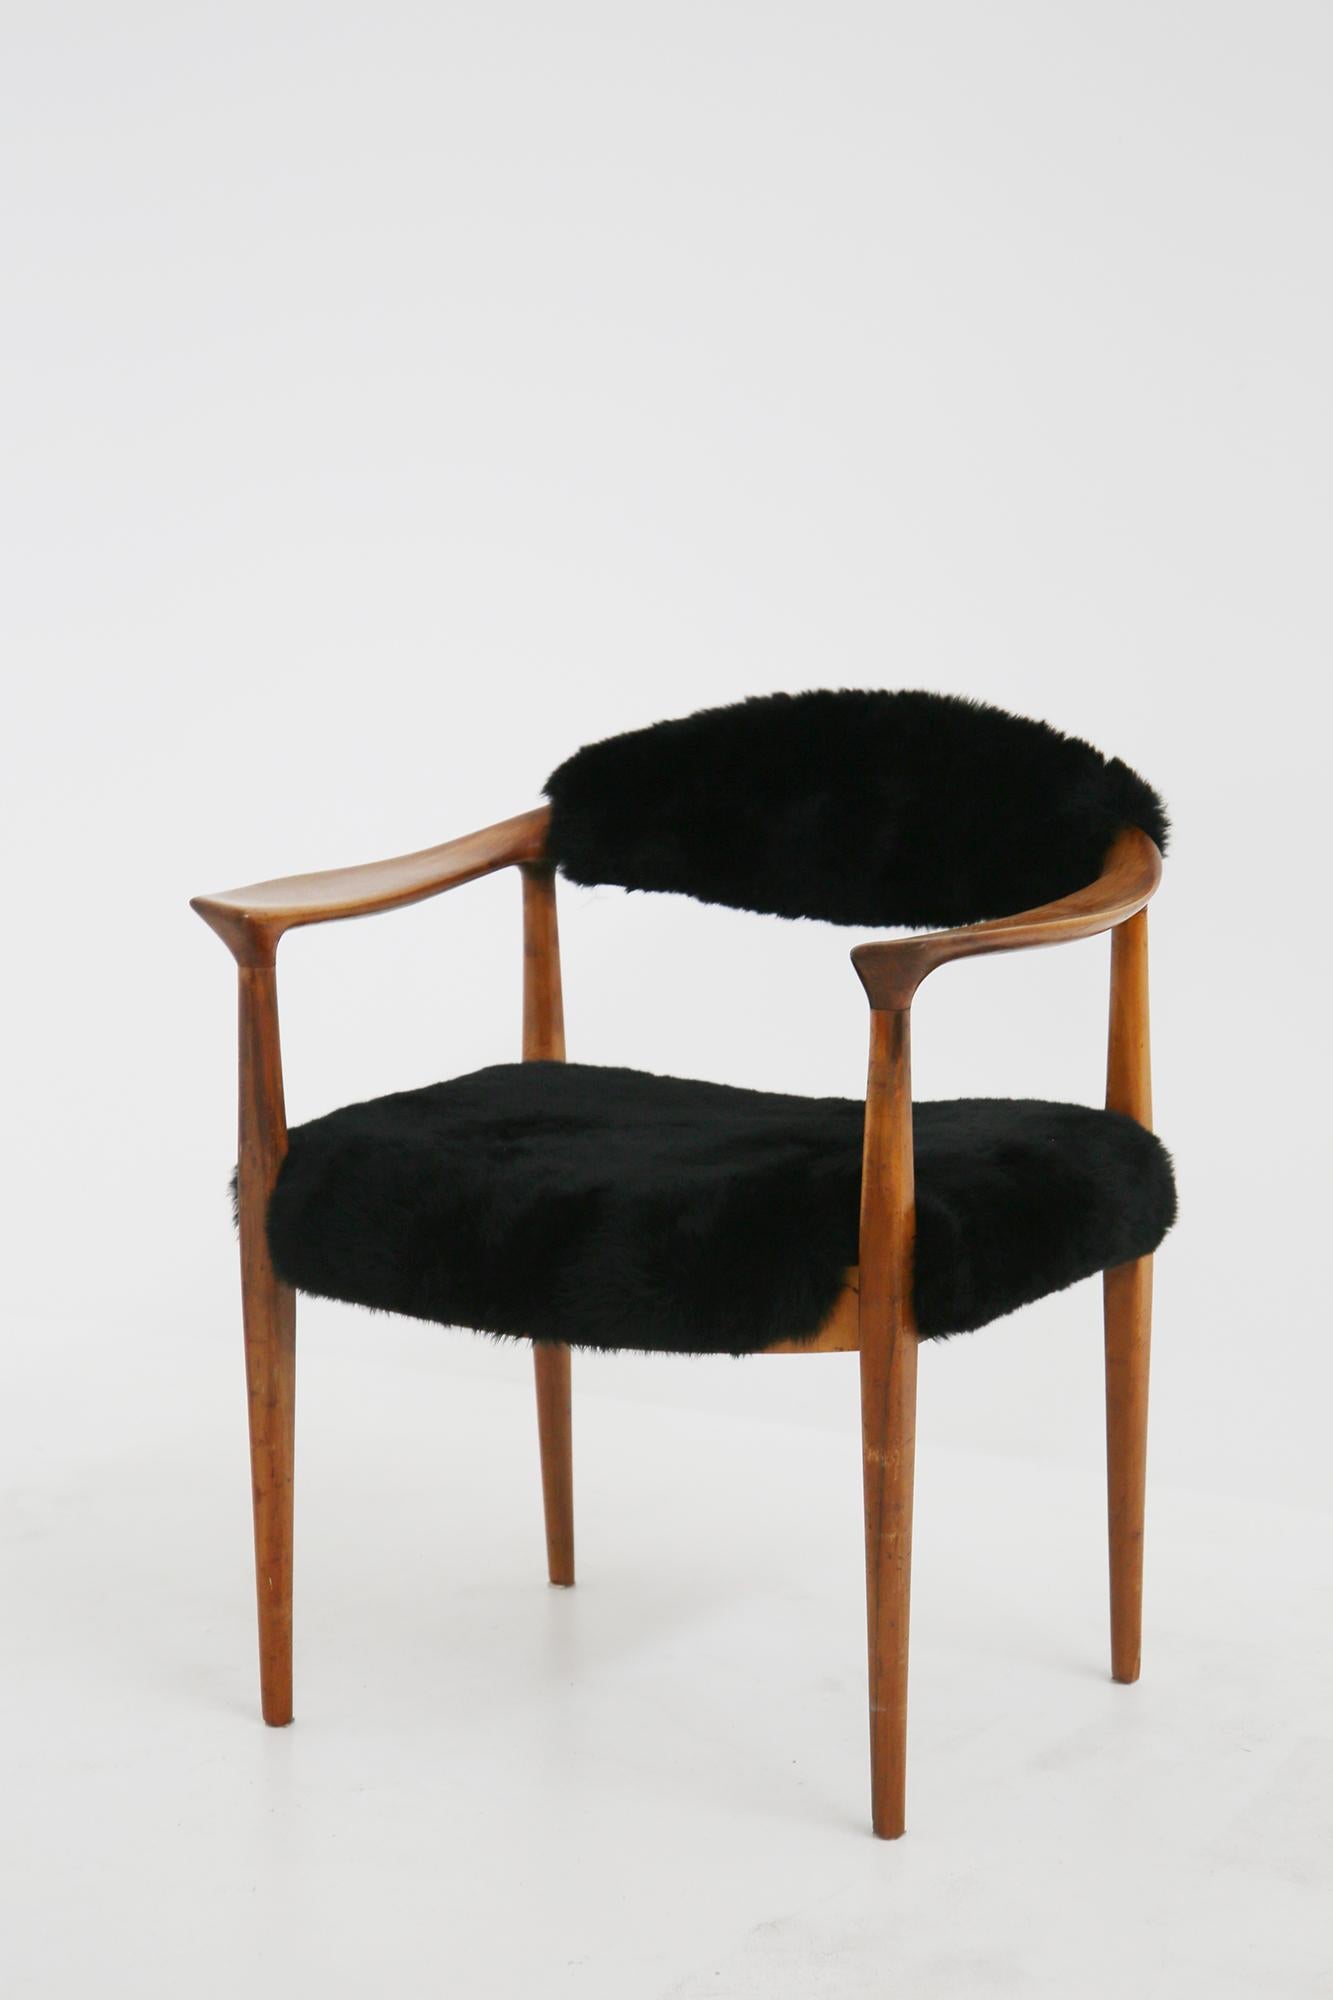 Harmonious pair of armchairs designed by Hans Wegner in 1950. The armchairs are the typical Scandinavian design armchairs, this is recalled by the wood and its essential and rigorous shapes. The seats have been re-lined with a beautiful black